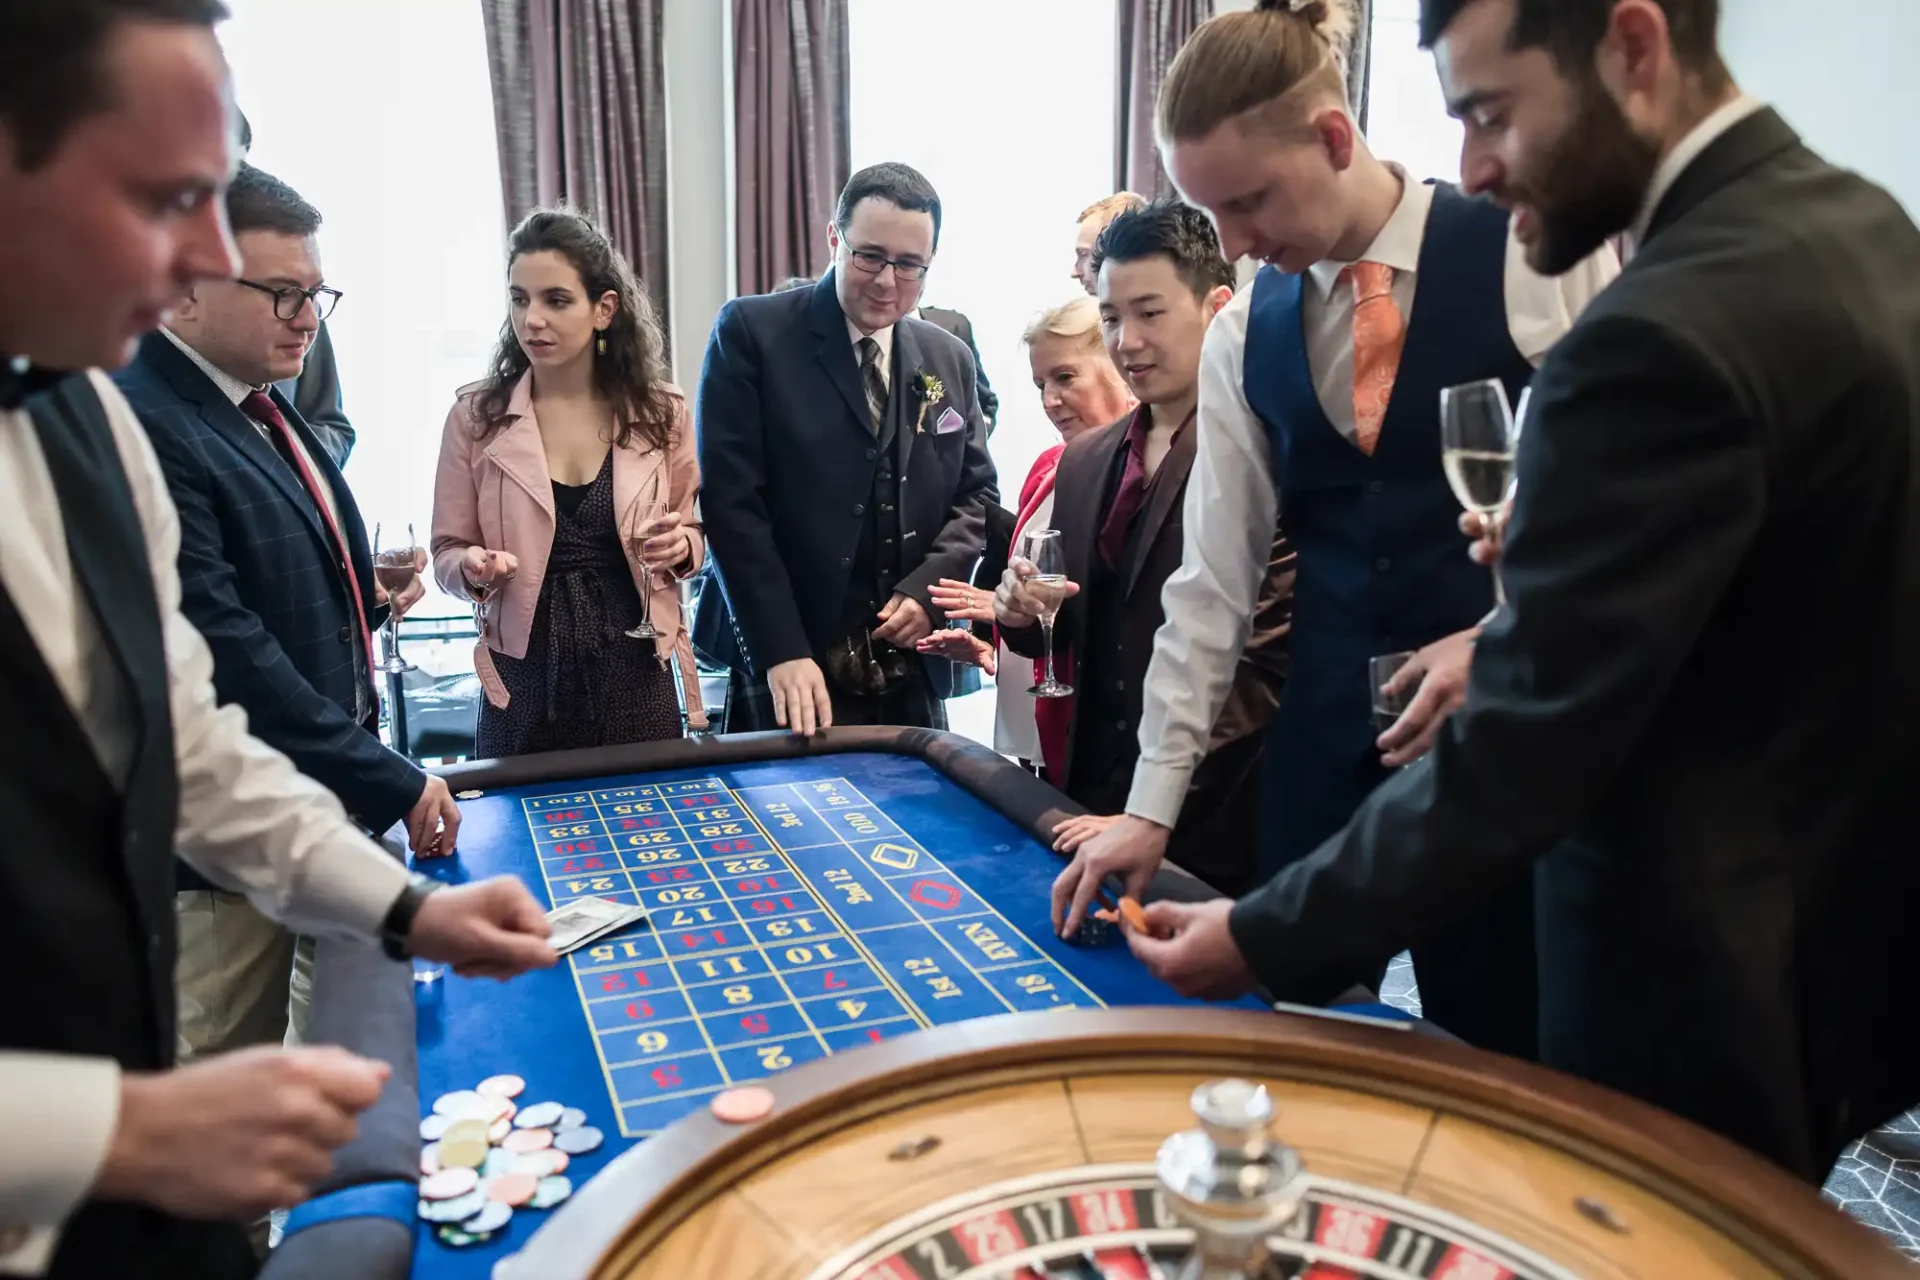 Group of people standing around a roulette table at a casino, engaged in placing bets with chips.